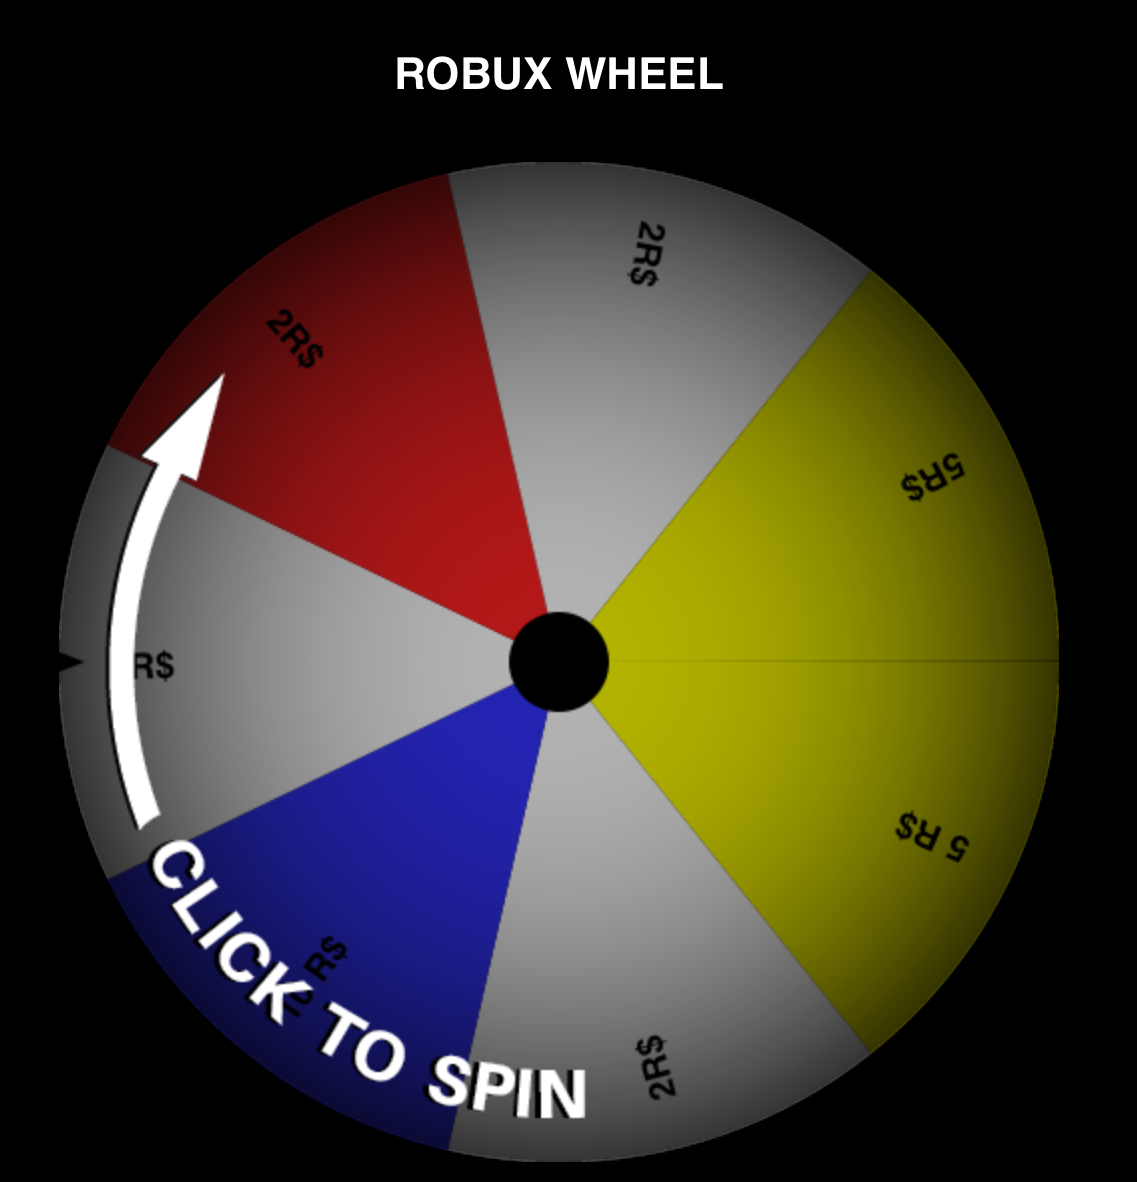 Adopt Me News On Twitter Behold The Robux Wheel To Have A Spin You Need To Like Retweet And Follow Weebkookie Only 1 Winner - robux wheel